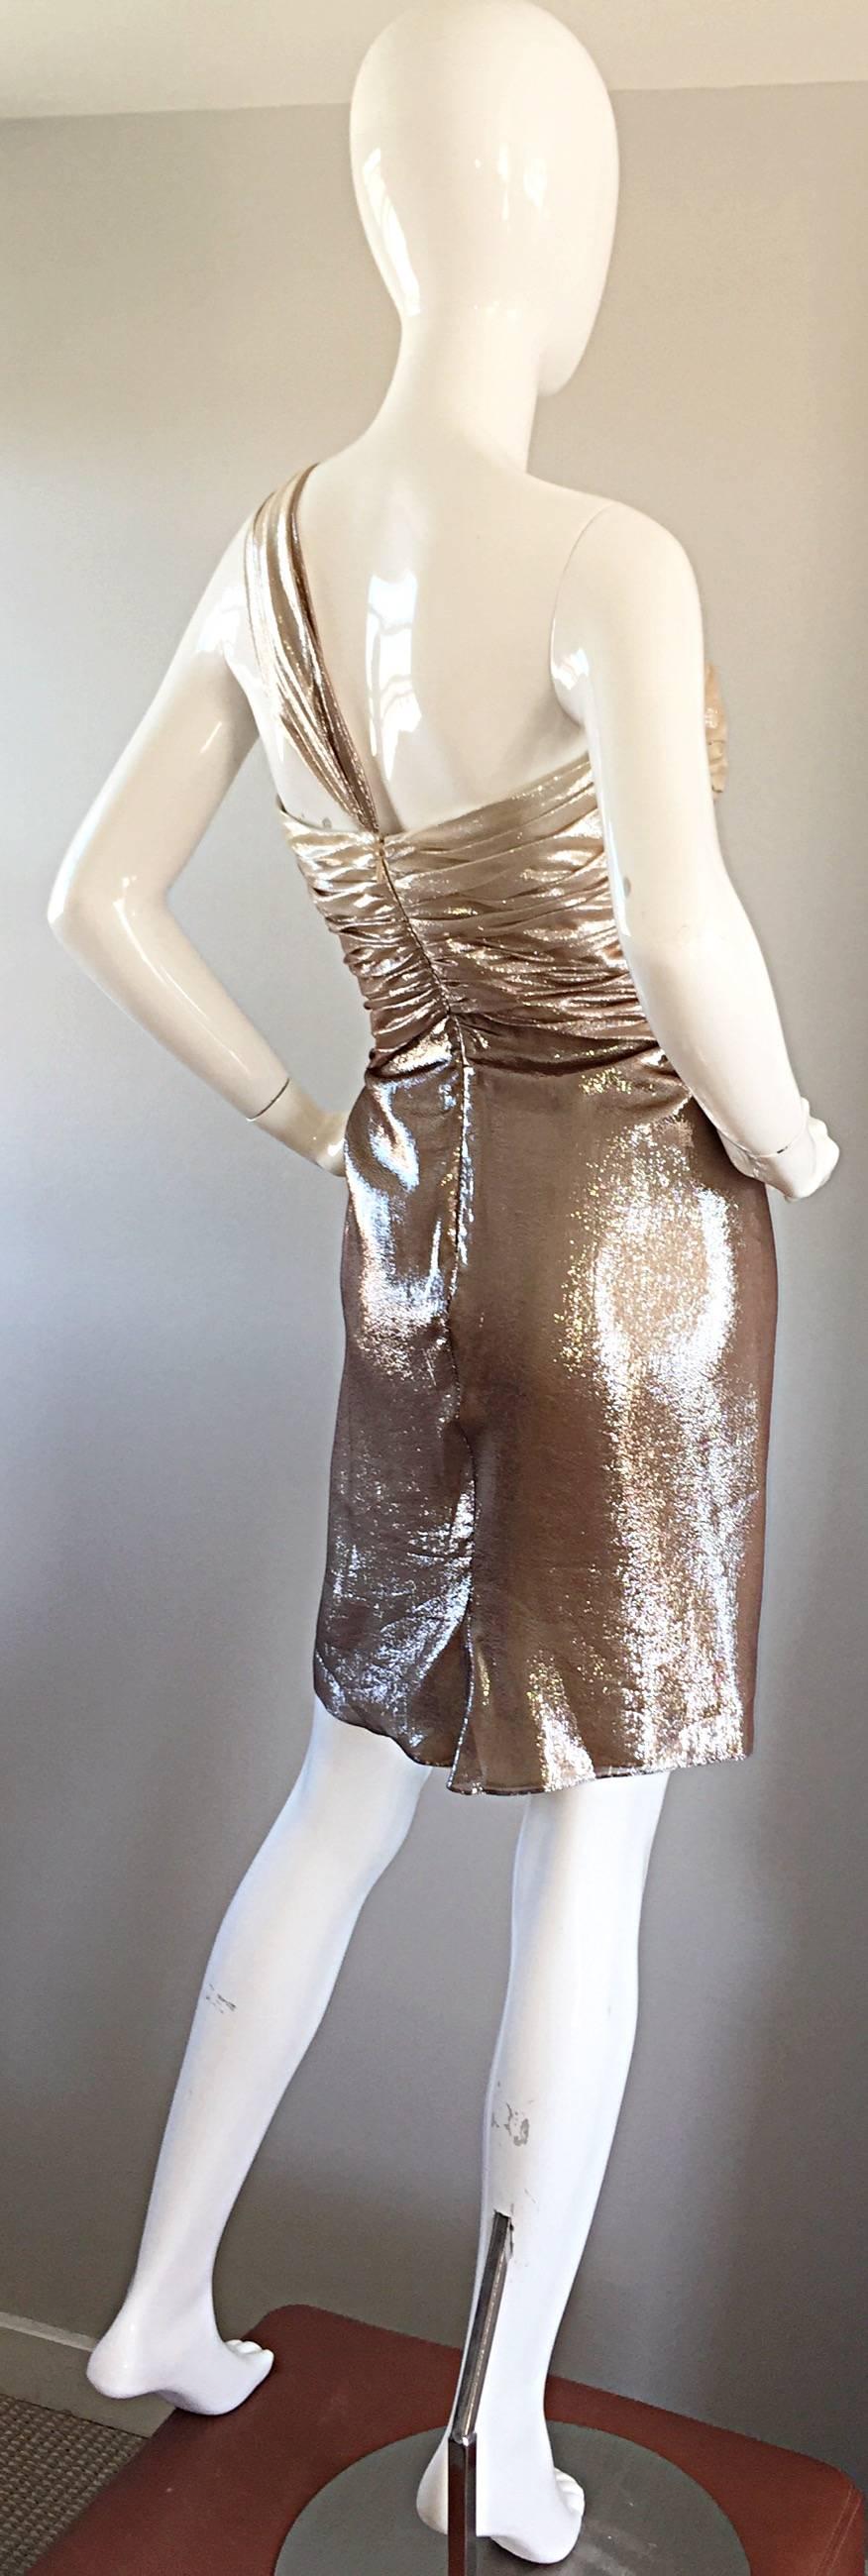 New Pamella Roland Size 6 Gold Ombre Metallic One Shoulder Grecian Silk Dress In Excellent Condition For Sale In San Diego, CA